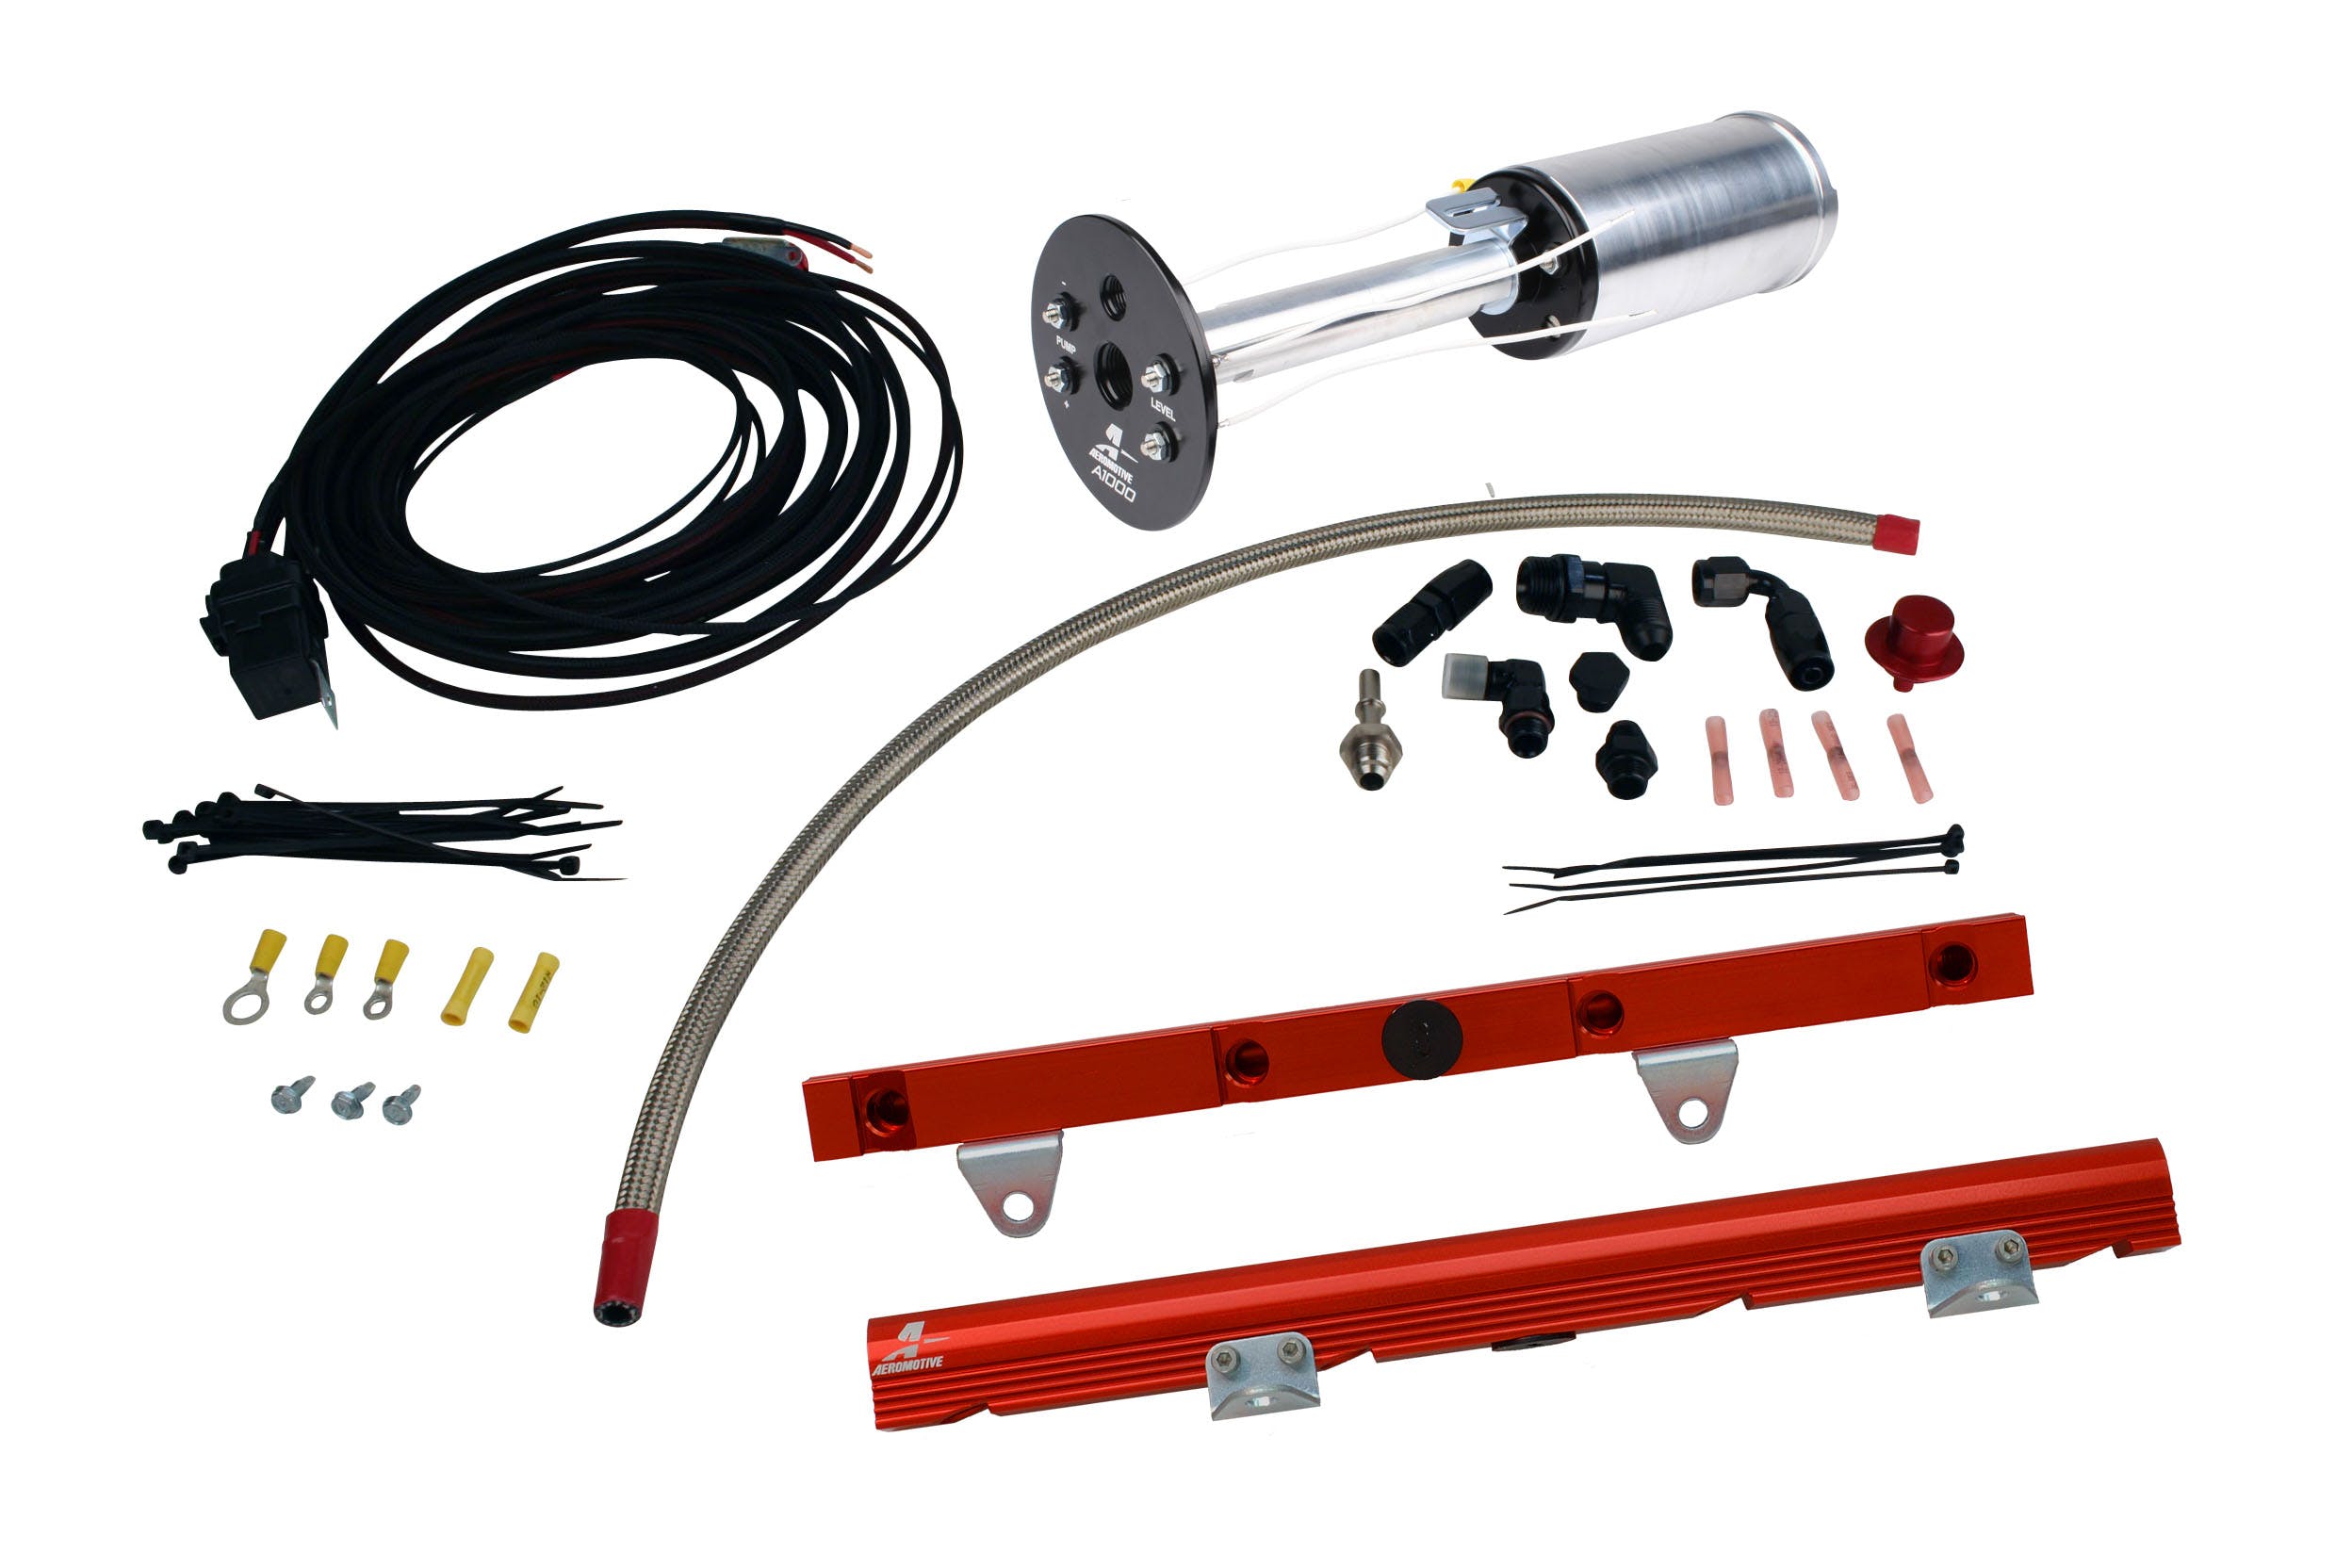 Aeromotive Fuel System 17172 System, C6 Corvette, 18670 A1000, 14106 LS-1 Rails, 16307 Wire Kit and; Fittings